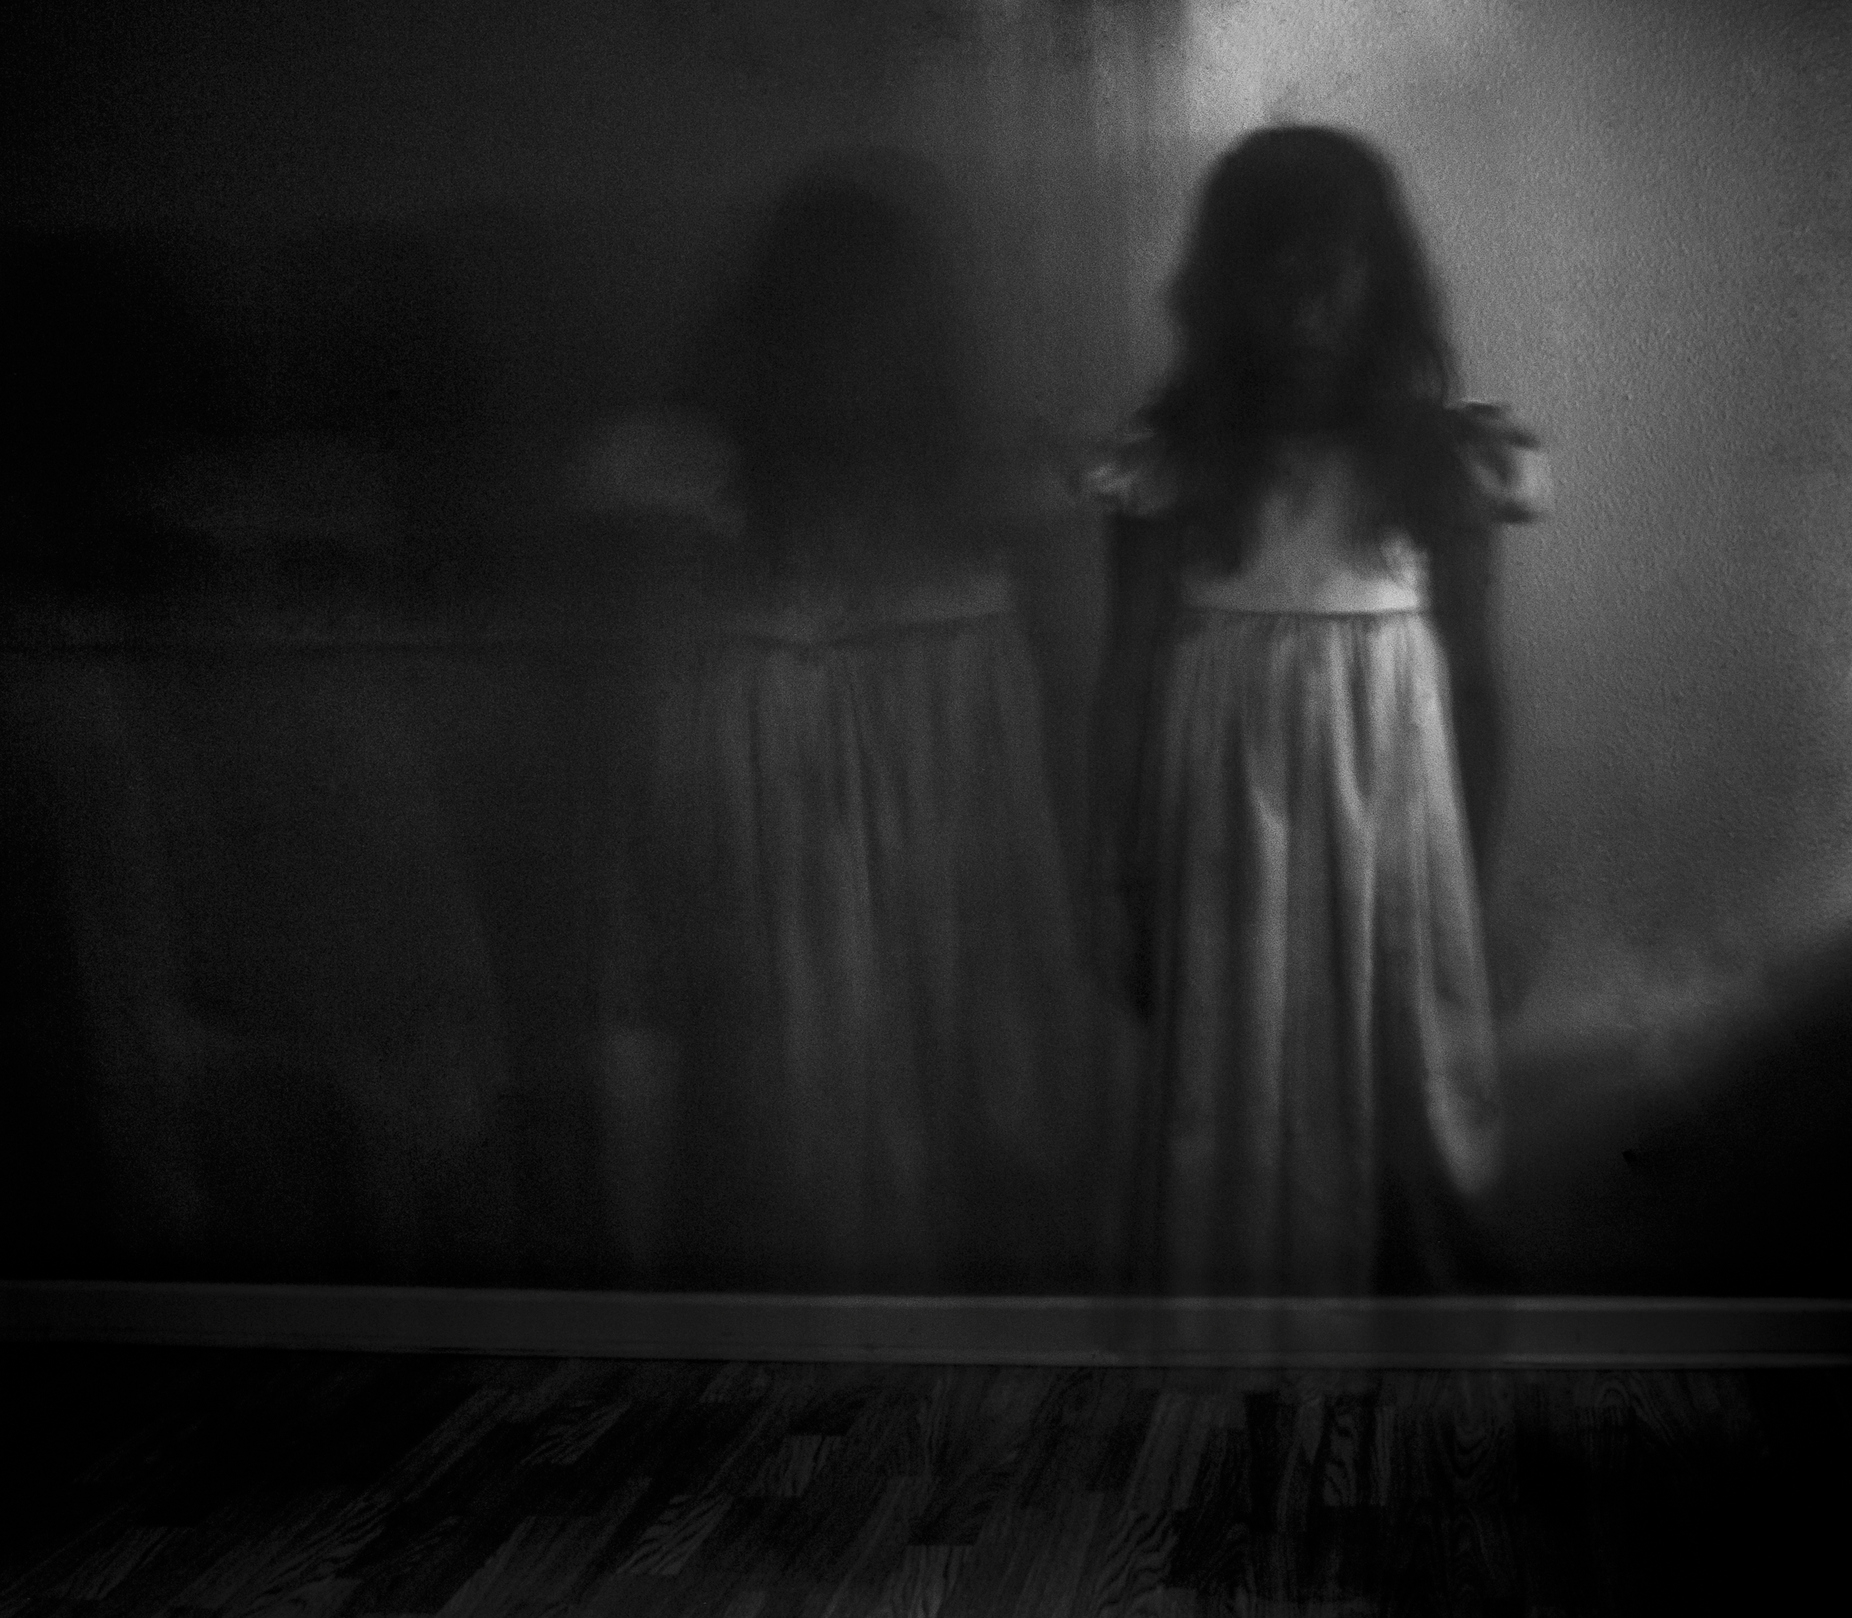 Blurry figure of a young girl and her mirror image wearing long gowns